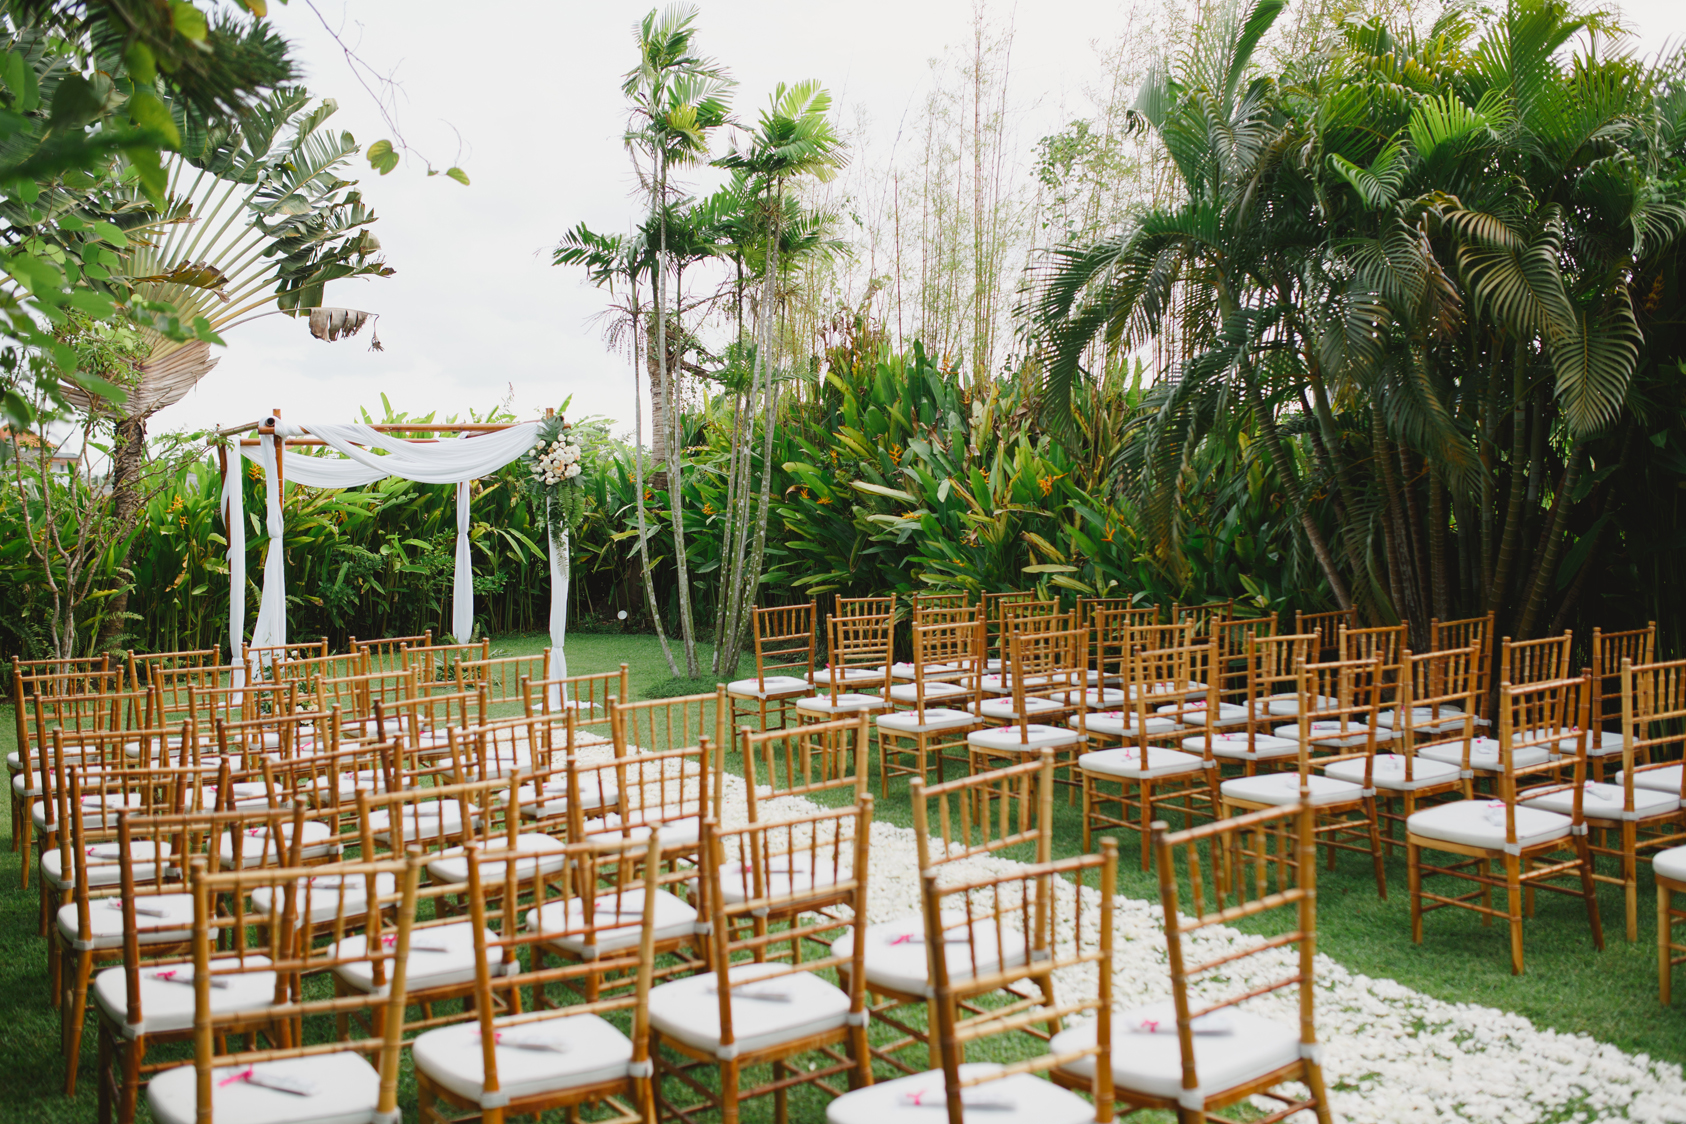 Bali Wedding Decorations and Flowers